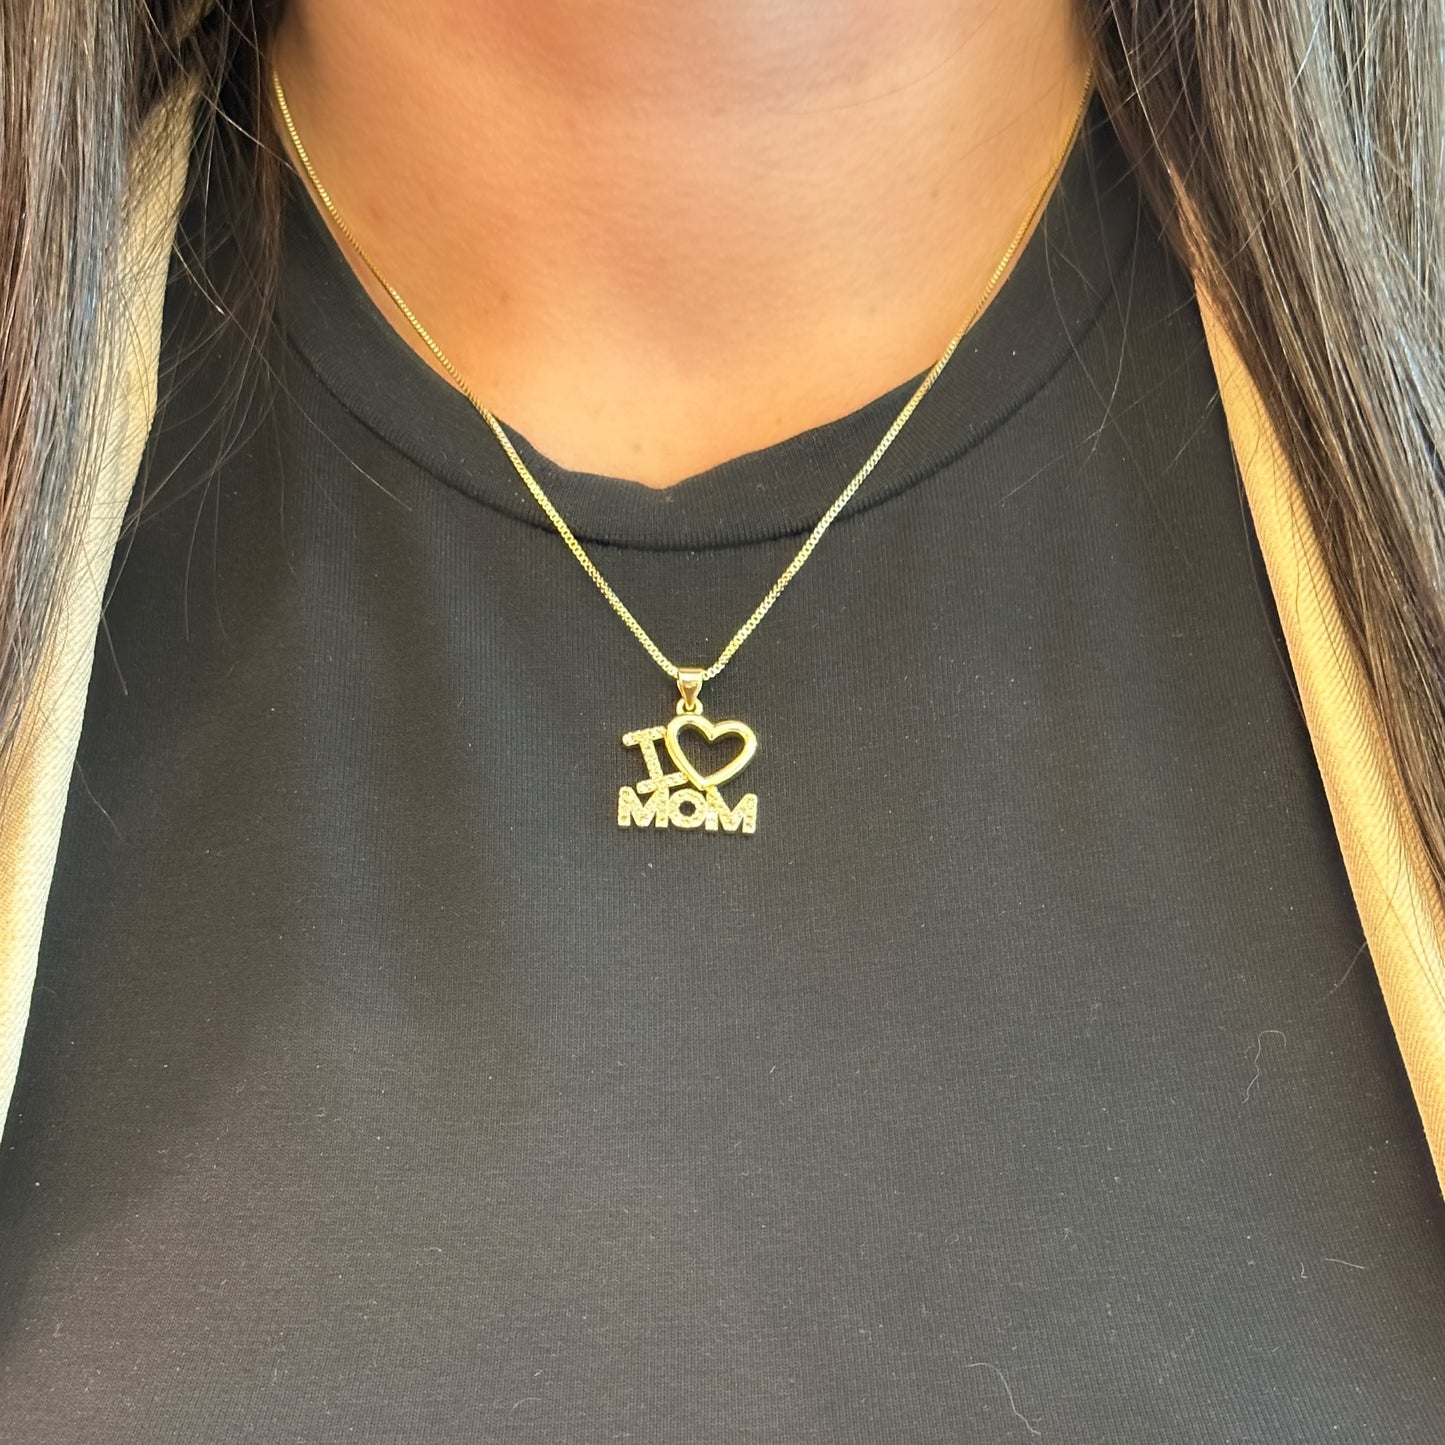 I LOVE MOM NECKLACE | 18k Gold Plated